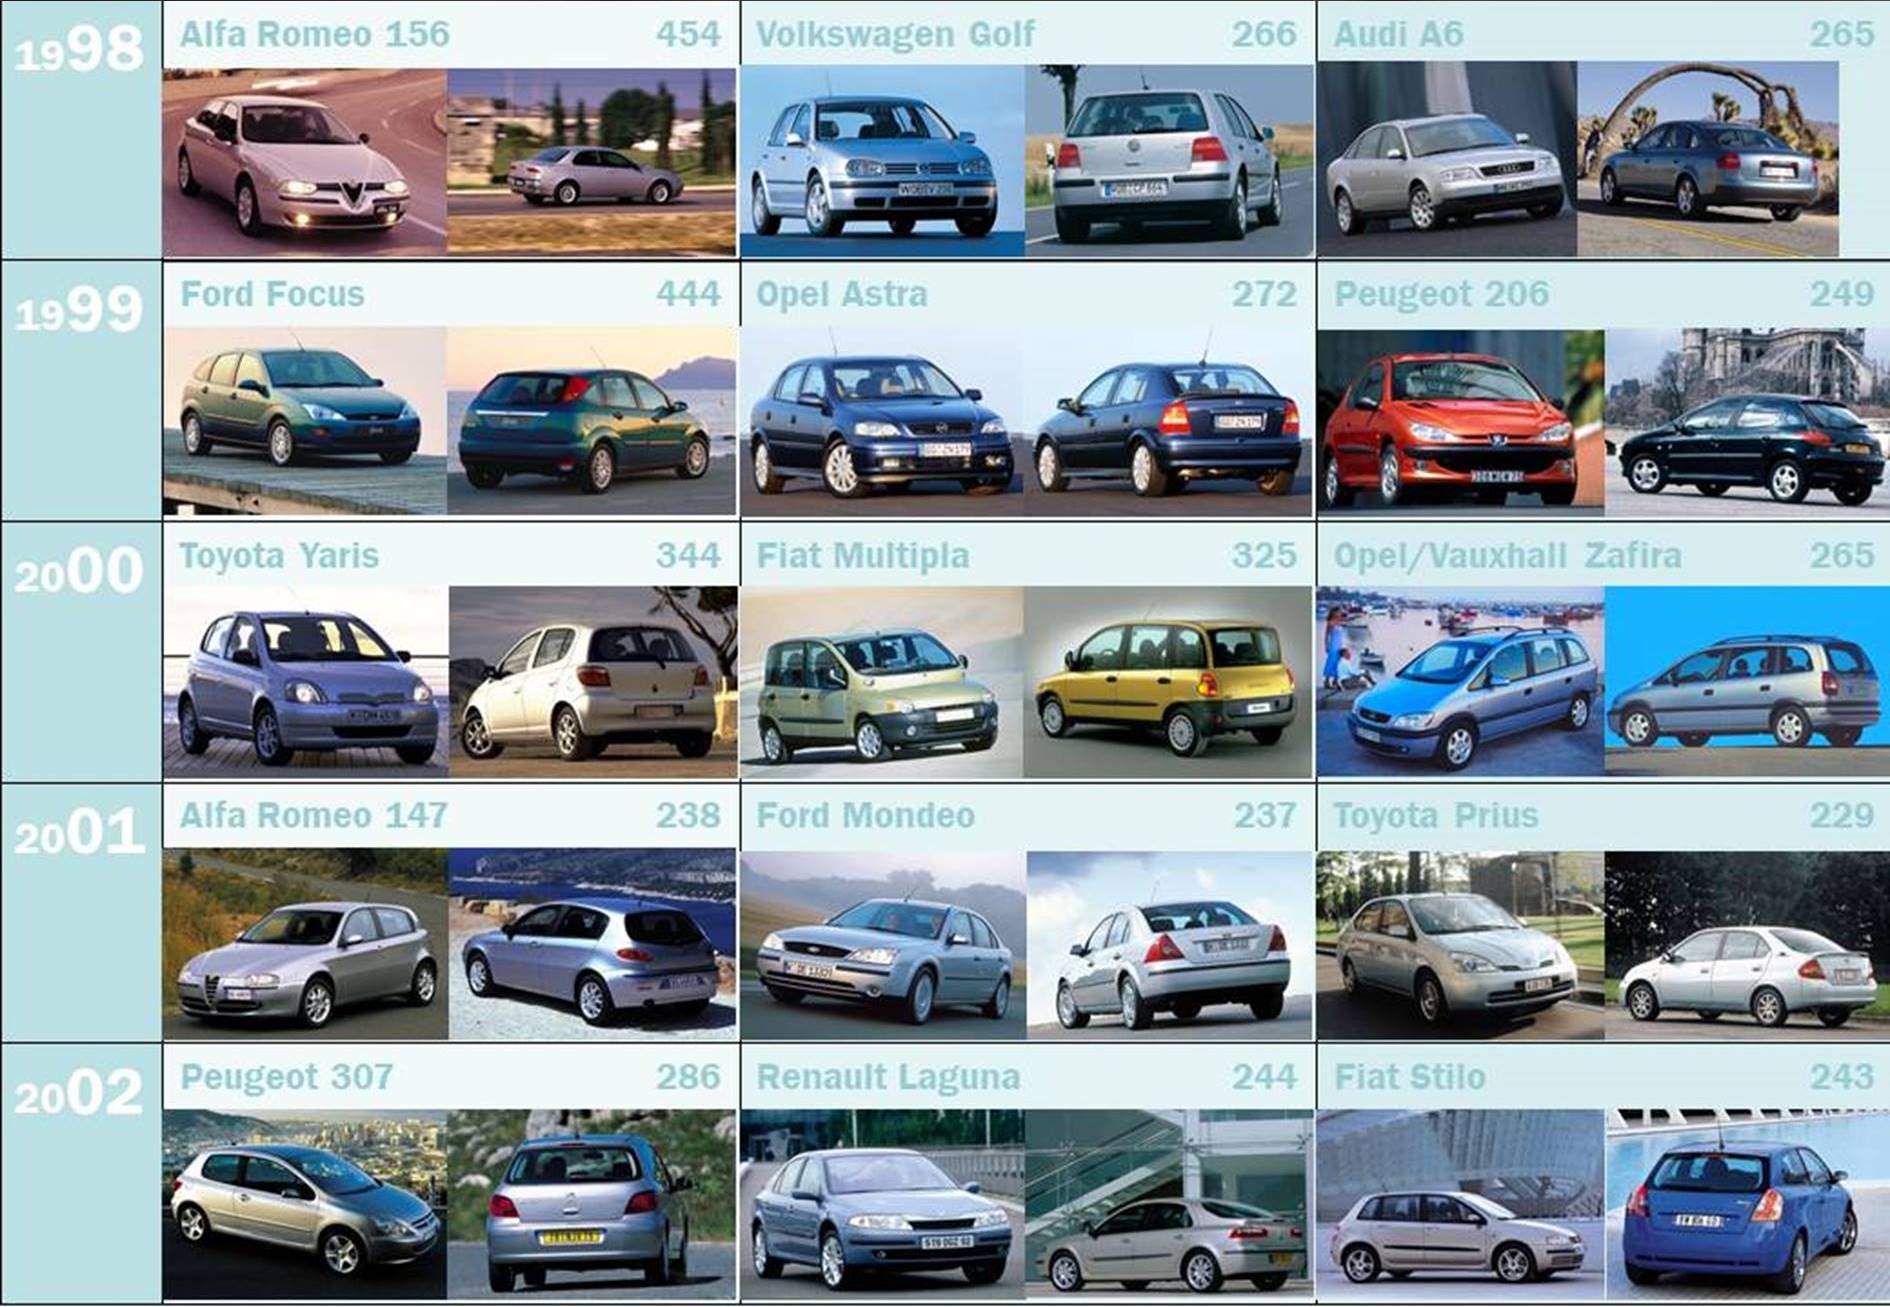 Slide from a PowerPoint with photos of cars and achieved position and points